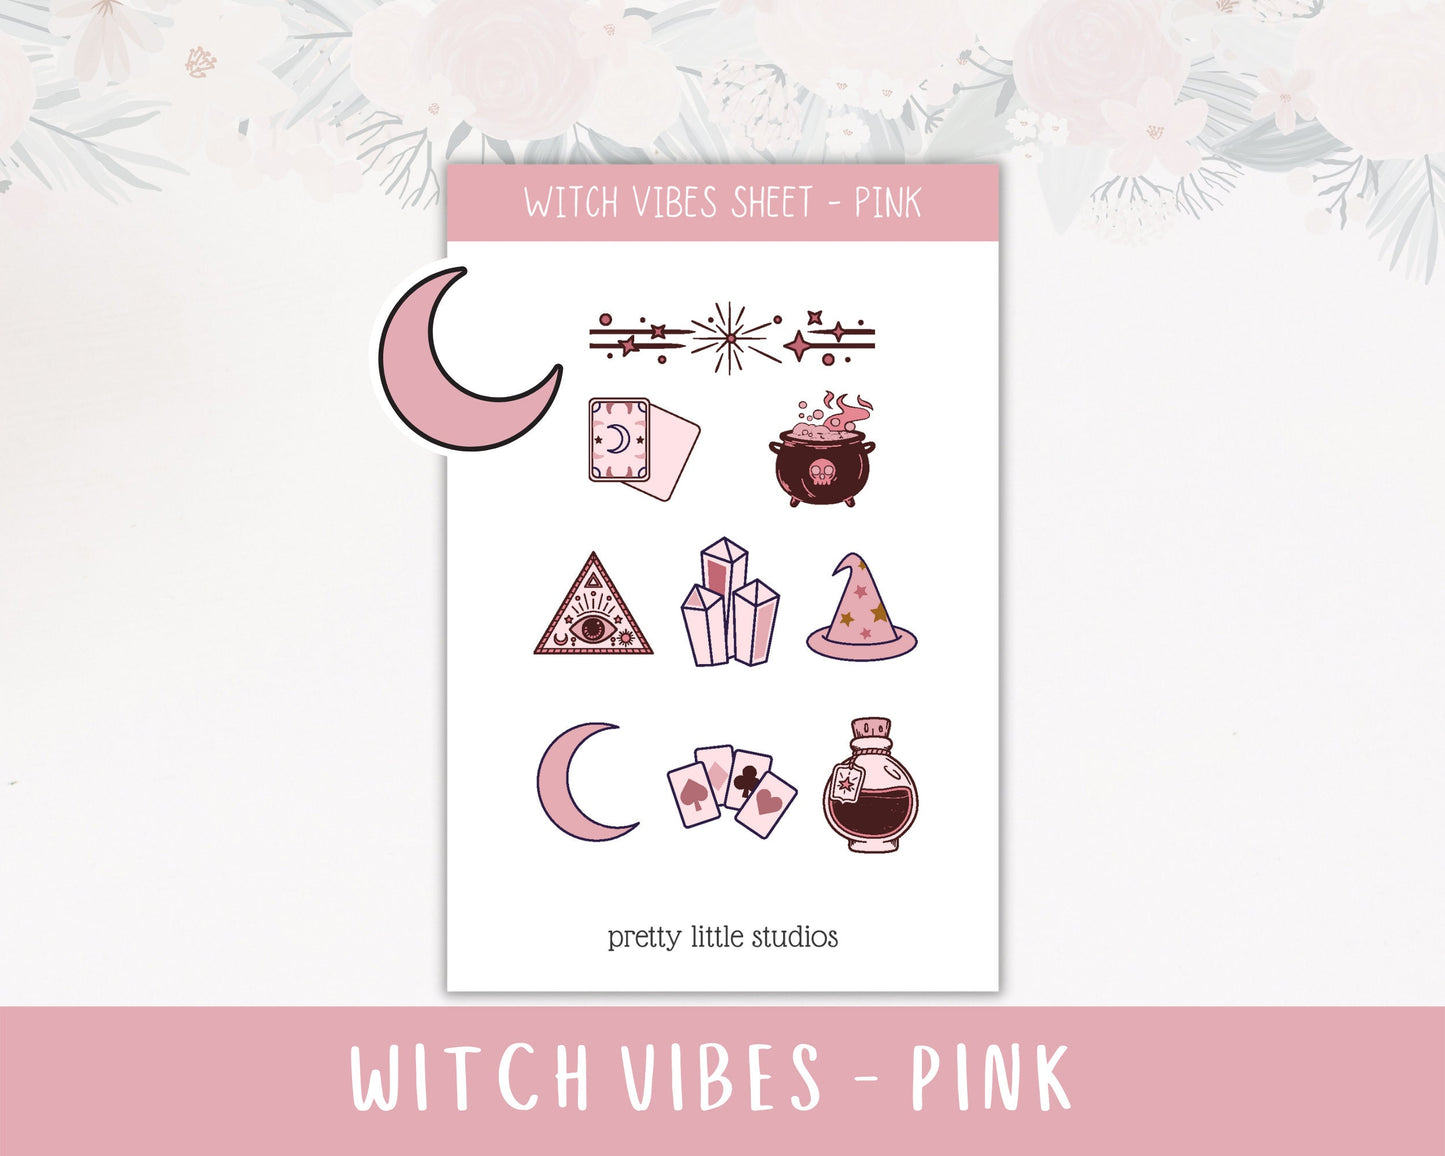 Witchy Vibes Sticker Sheets - Bullet Journal Stickers - Planner Stickers - Witch Stickers